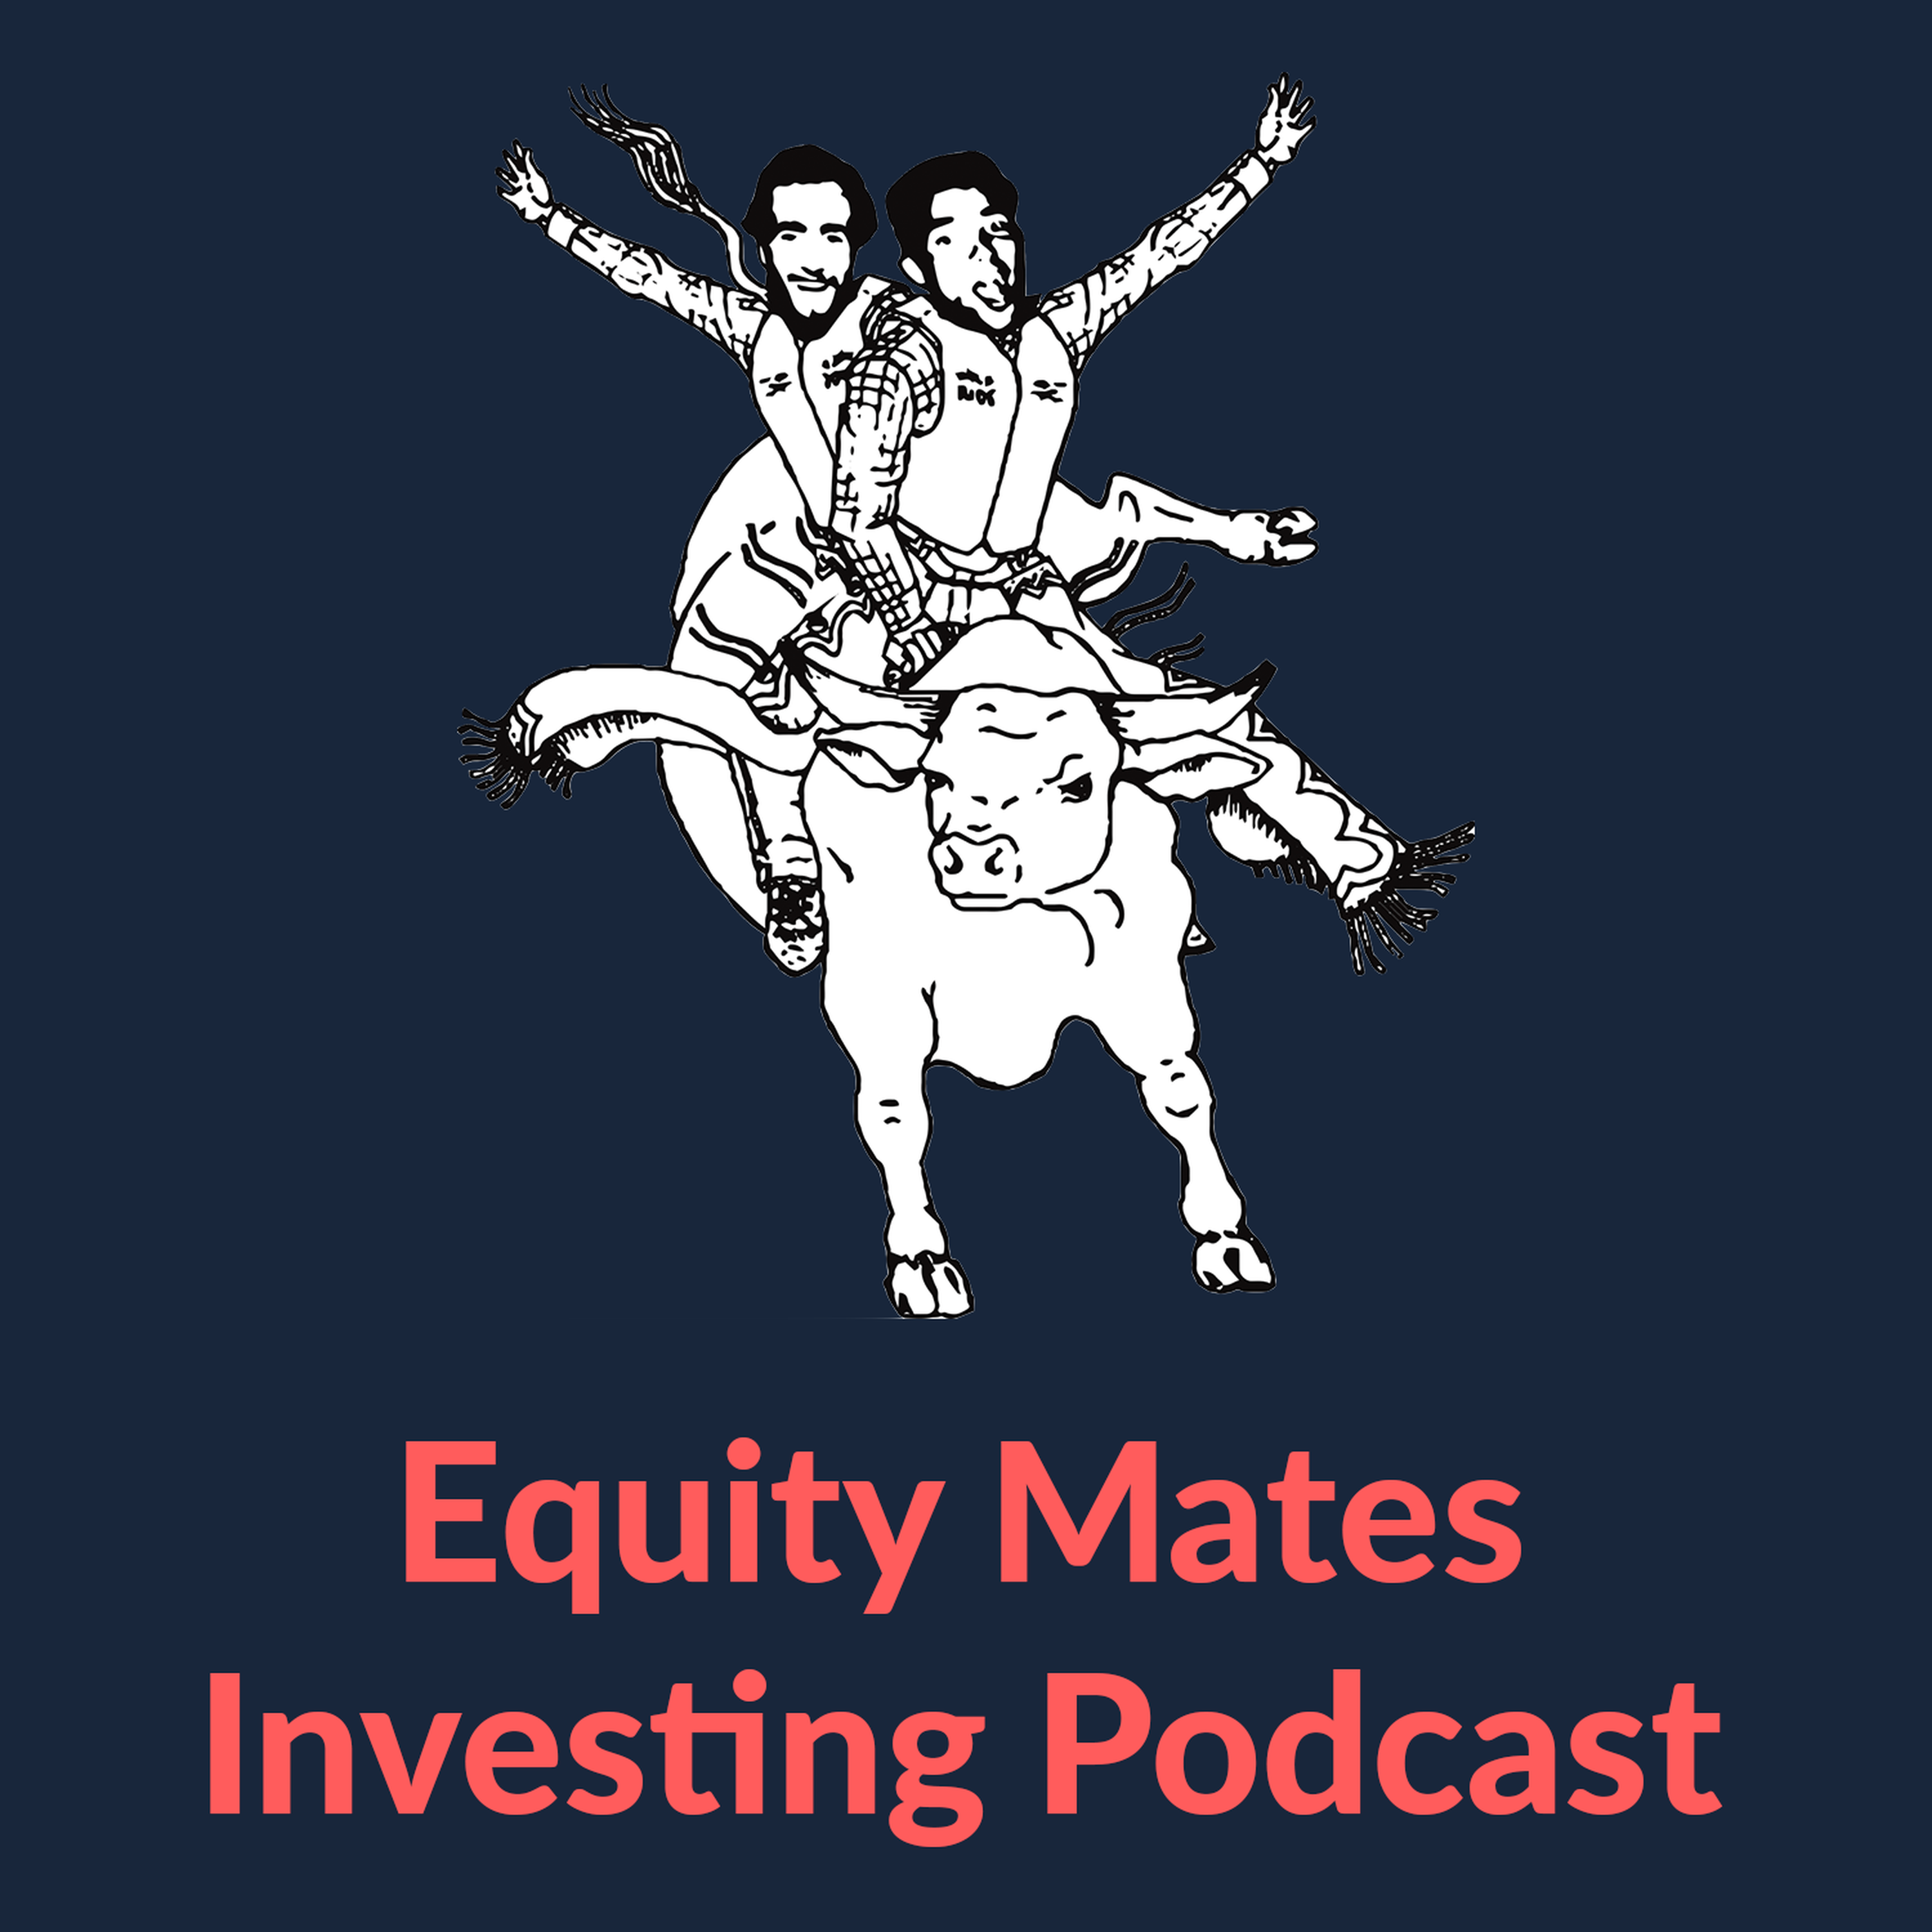 Expert Investor: Mates Of Equity Mates w/ Peter Knespal - All Things Bonds